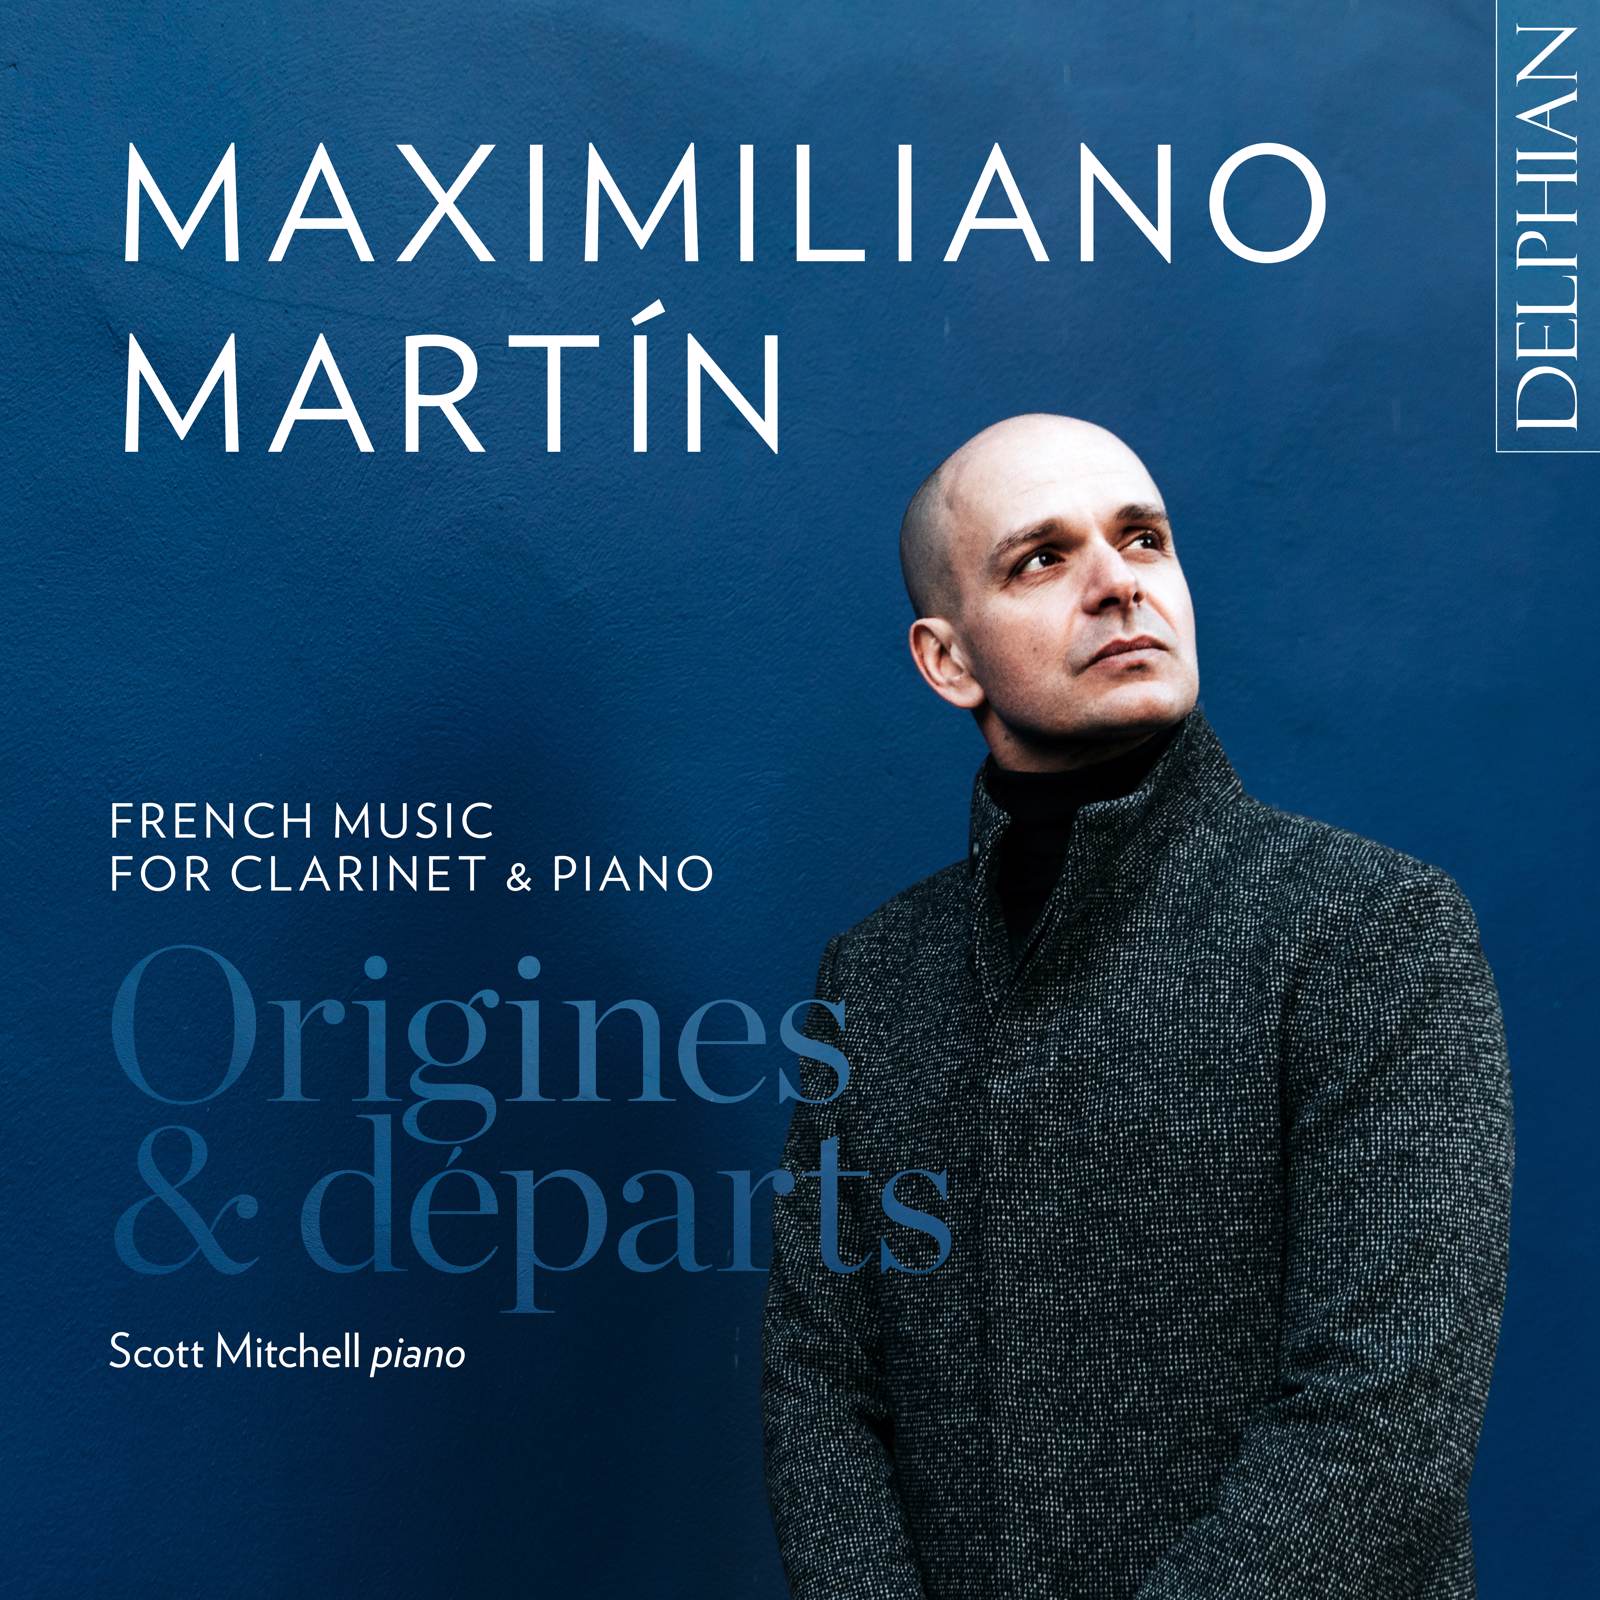 Origines & départs: French music for clarinet and piano CD Delphian Records